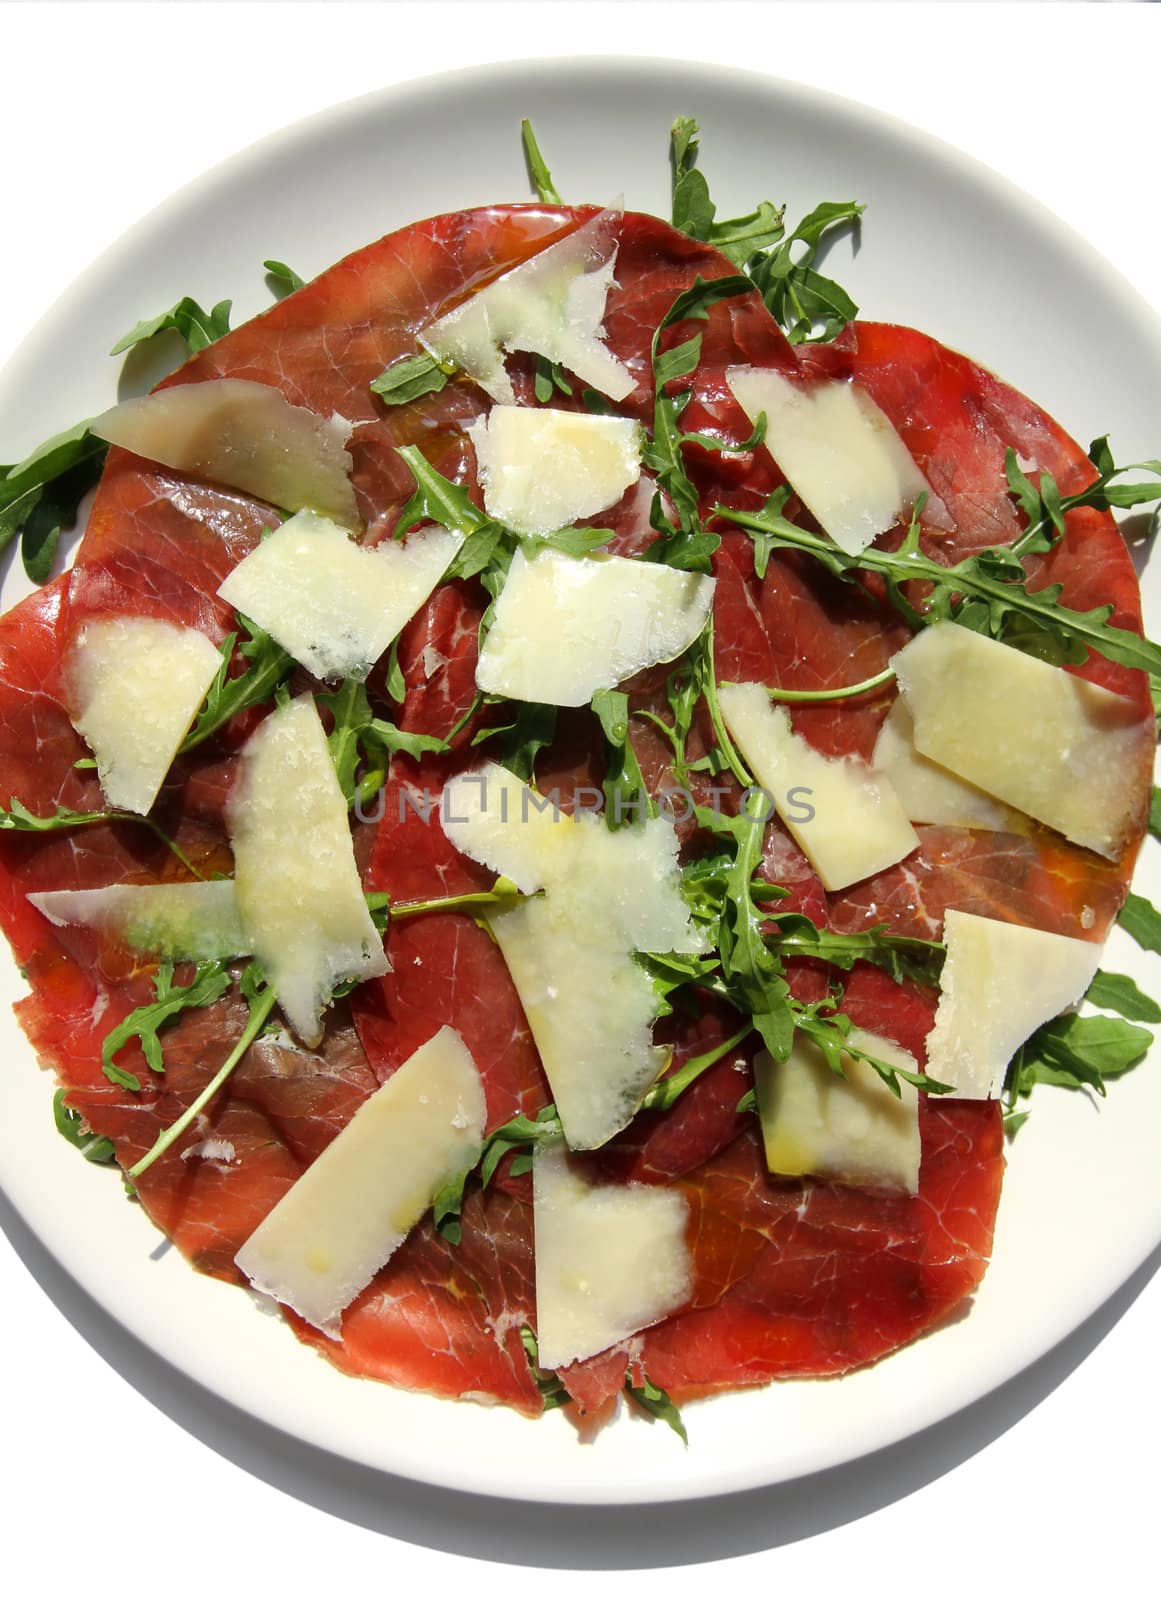 delicious italian Carpaccio plate with beef slices and Parmesan cheese